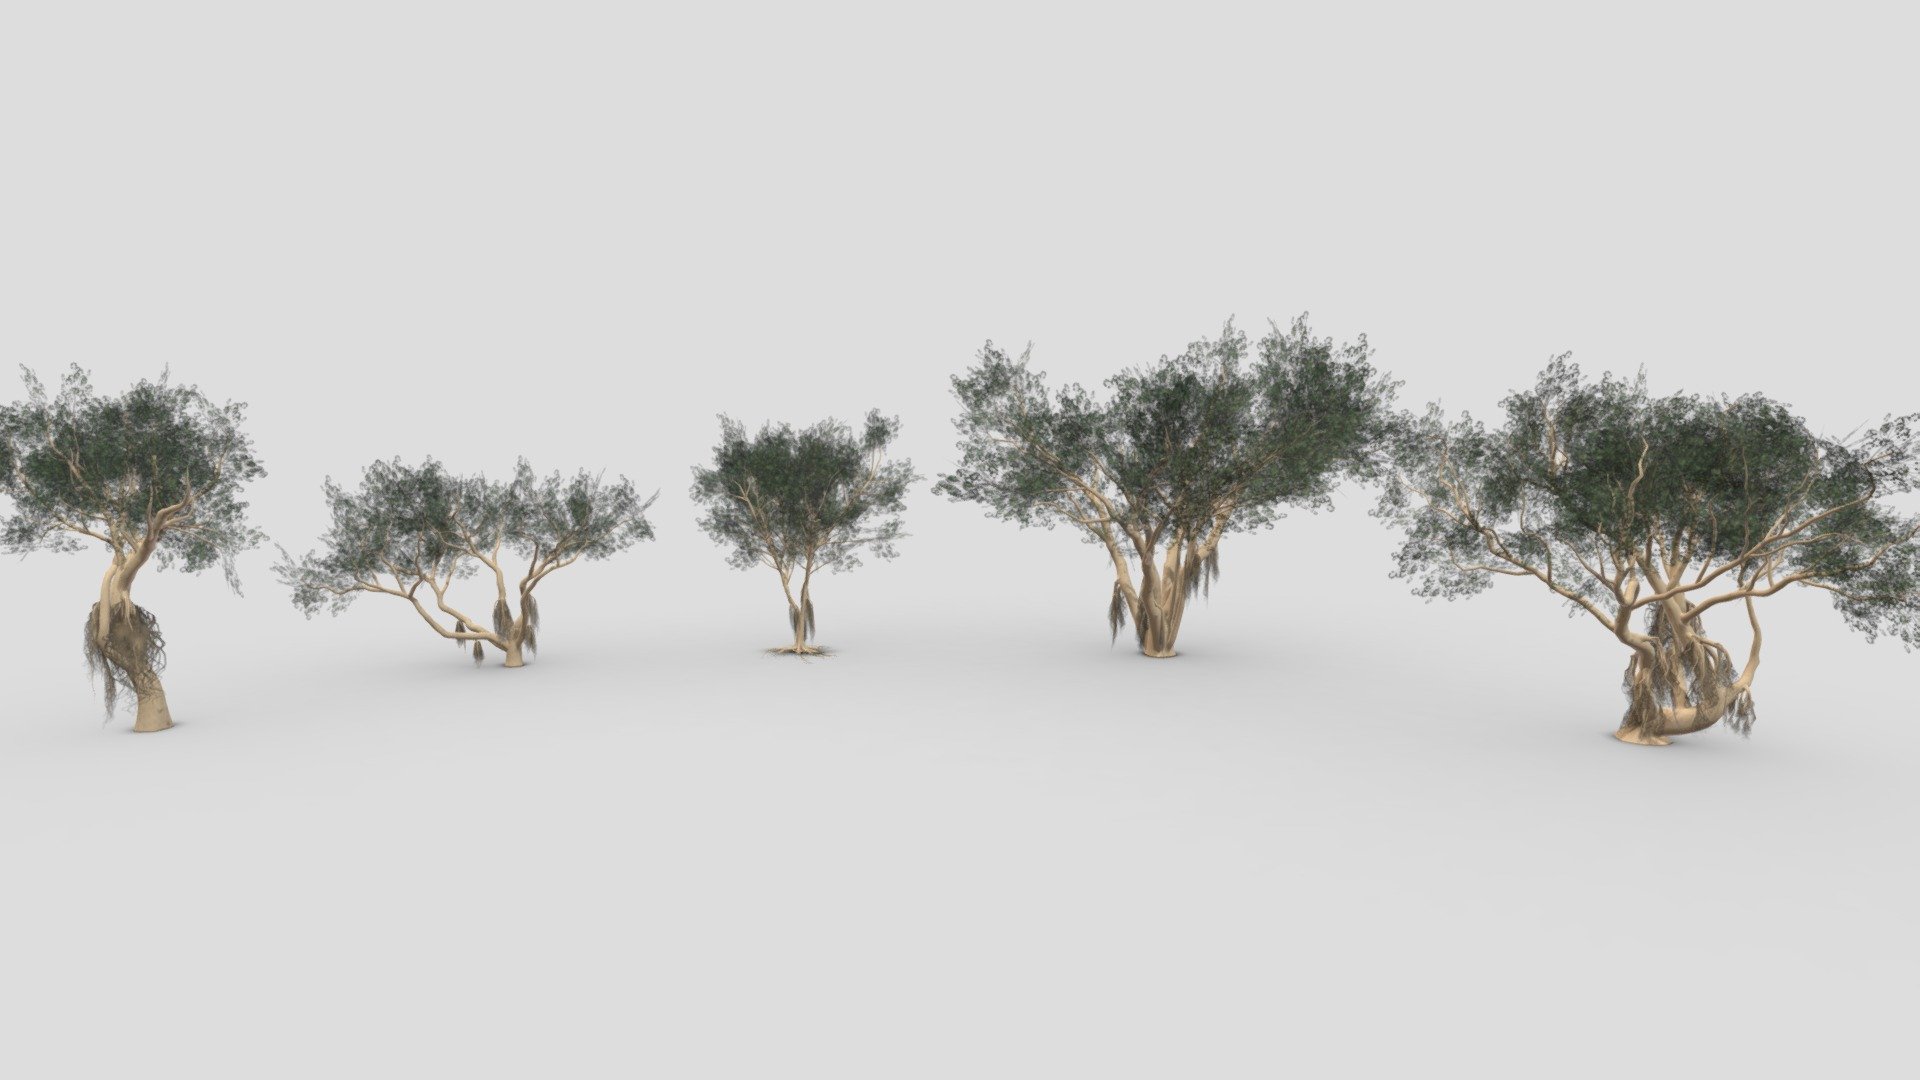 This file includes a collection of 5 3D Models of the Ficus Benjamina Tree.

Note; This is the Fourth collection of Ficus Benjamina Tree.

Ficus Benjamina Tree-S16: https://sketchfab.com/3d-models/ficus-benjamina-tree-s16-aa83458844fe4033b1f0792e5d842326

Ficus Benjamina Tree-S17: https://sketchfab.com/3d-models/ficus-benjamina-tree-s17-88c9bf1df6884d4e8b8ef30f2a720068

Ficus Benjamina Tree-S18: https://sketchfab.com/3d-models/ficus-benjamina-tree-s18-6371be367b9d4f55b3fe17063c02e19f

Ficus Benjamina Tree-S19: https://sketchfab.com/3d-models/ficus-benjamina-tree-s19-78081080da1e46549e5c4a1ea50cc1a3

Ficus Benjamina Tree-S20: https://sketchfab.com/3d-models/ficus-benjamina-tree-s20-7fe16c1aa6cc4d909d9549c94199c099 - Ficus Benjamina Tree- Pack 04 - Buy Royalty Free 3D model by ASMA3D 3d model